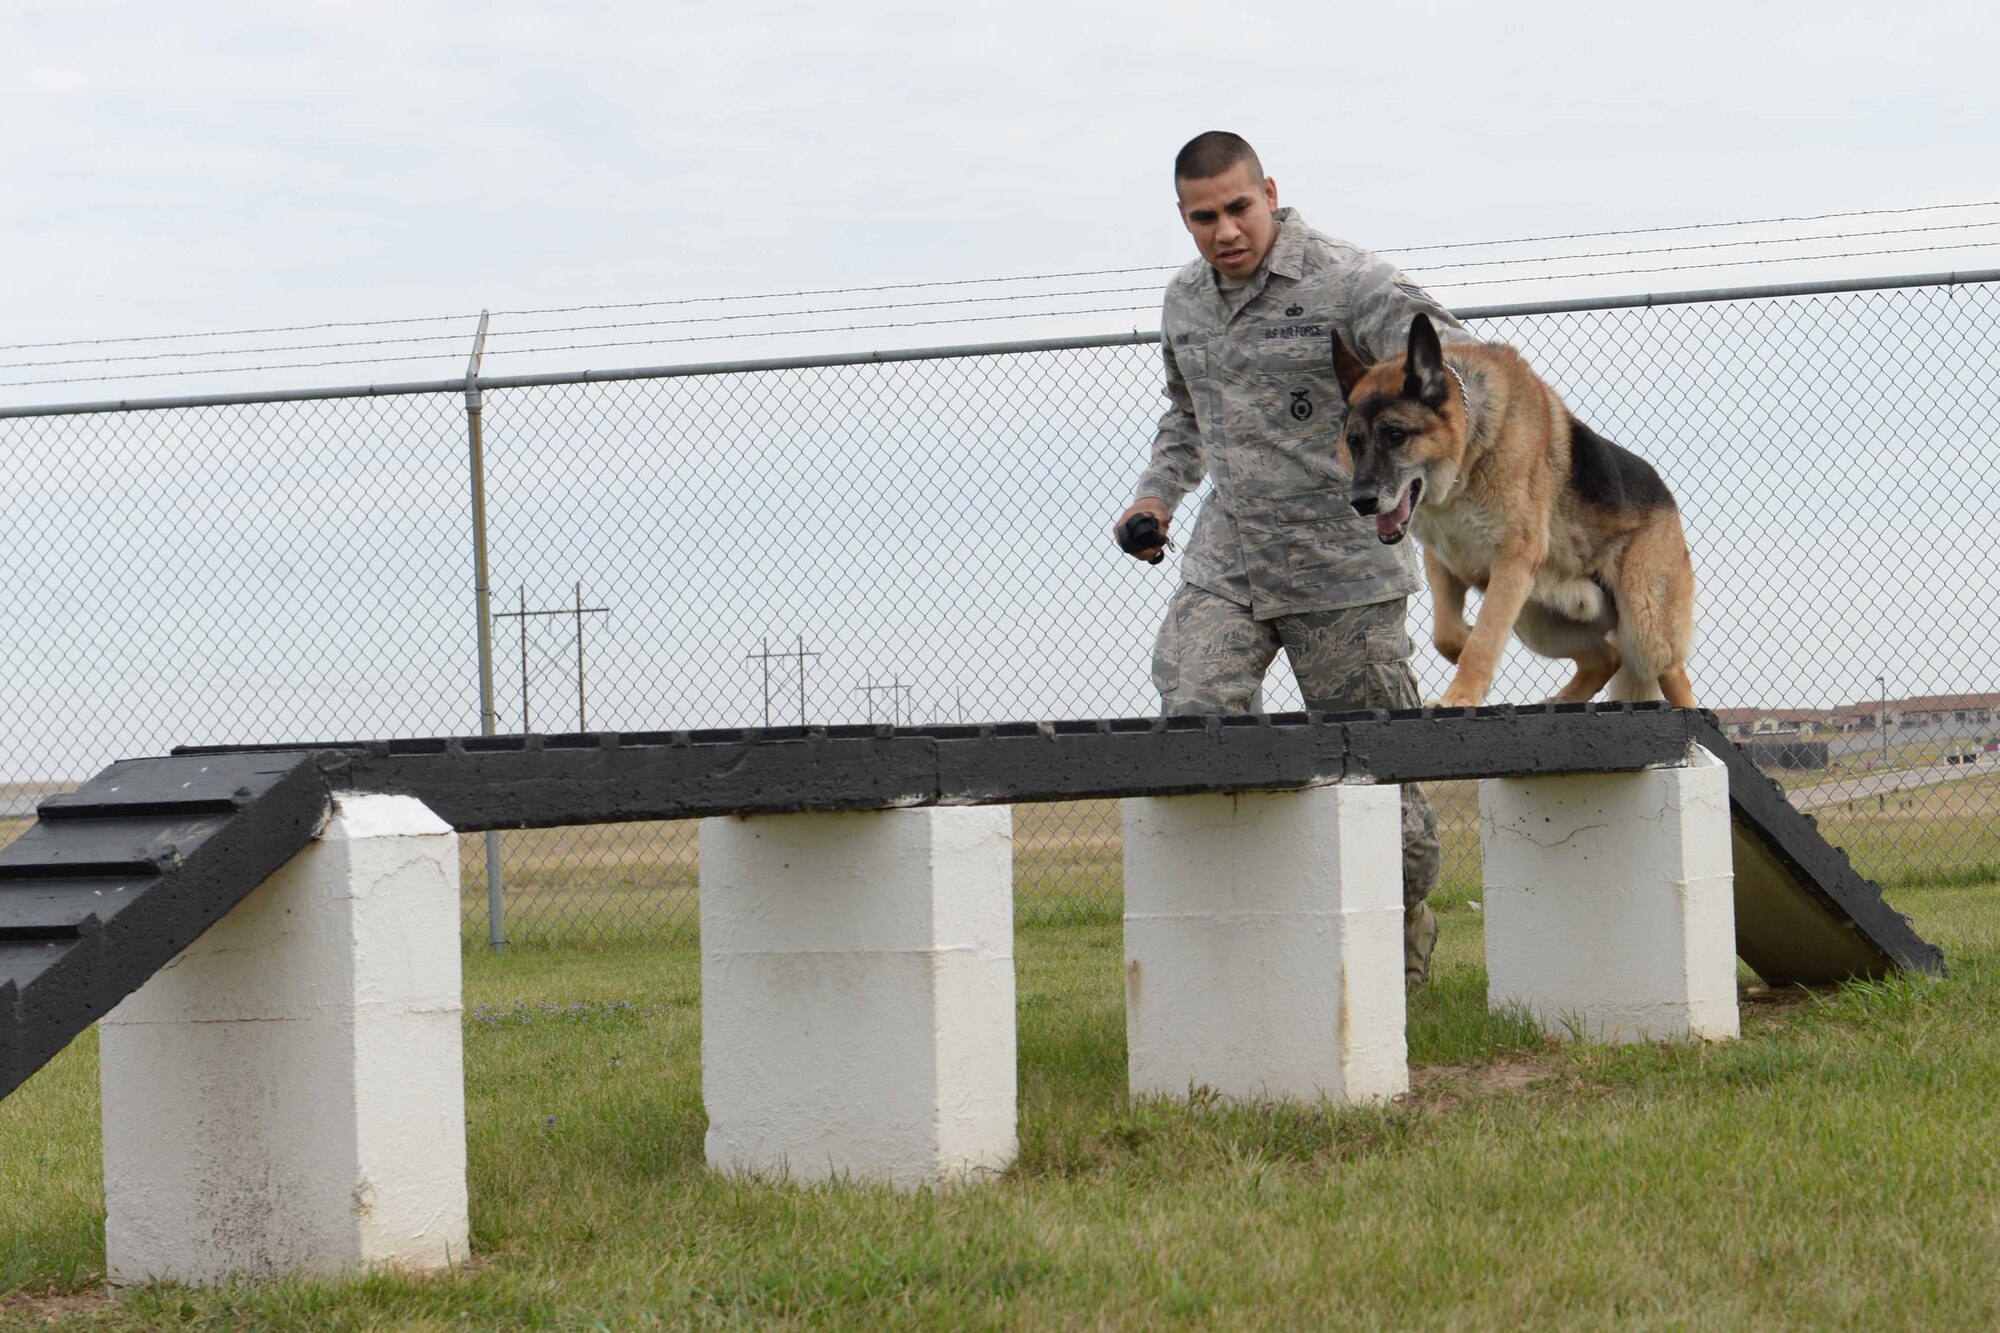 Staff Sgt. Michael Gwin, a military working dog handler assigned to the 28th Security Forces Squadron, runs Rex, a military working dog assigned to the 28th SFS, through an obstacle course at Ellsworth Air Force Base, S.D., Oct 9, 2015. MWD’s undergo constant training to ensure they are fit to fight anytime anywhere. (U.S. Air Force photo by SrA Rebecca Imwalle)